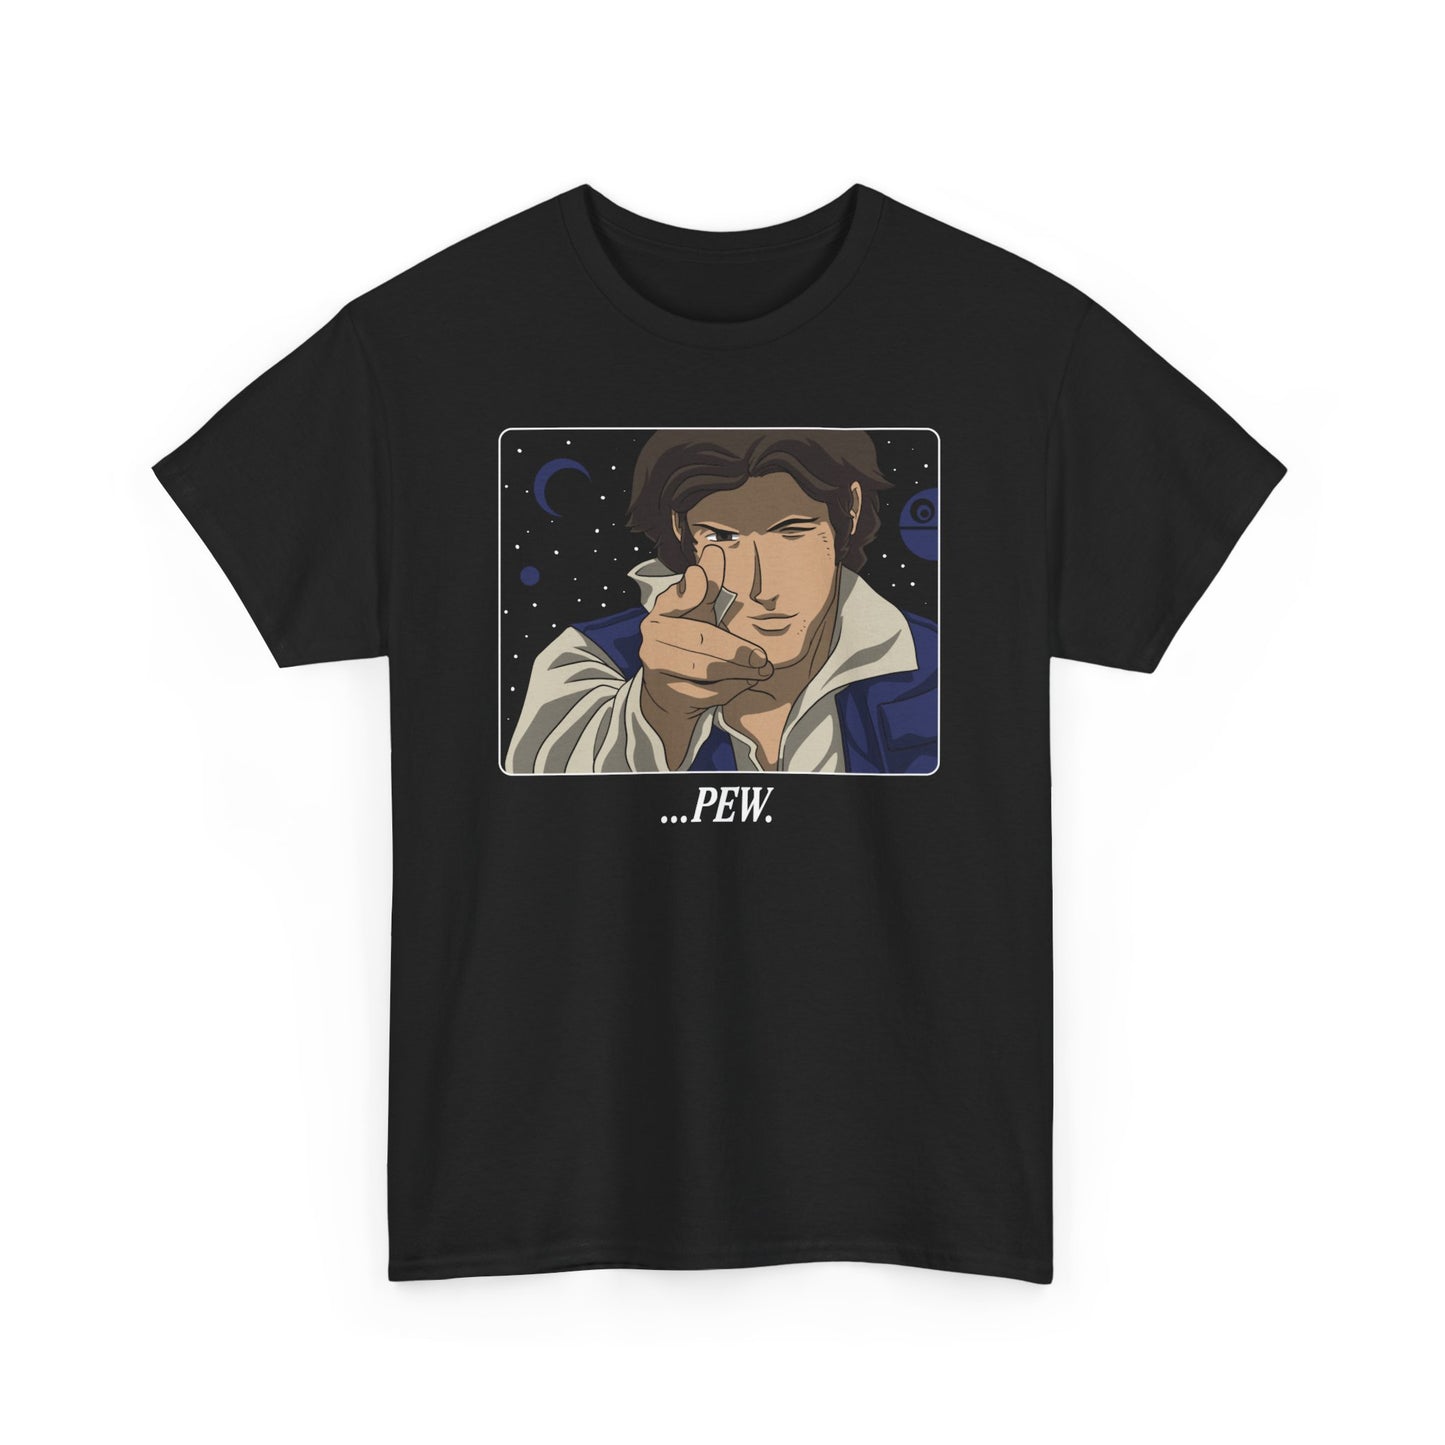 See You Space Smuggler t-shirt